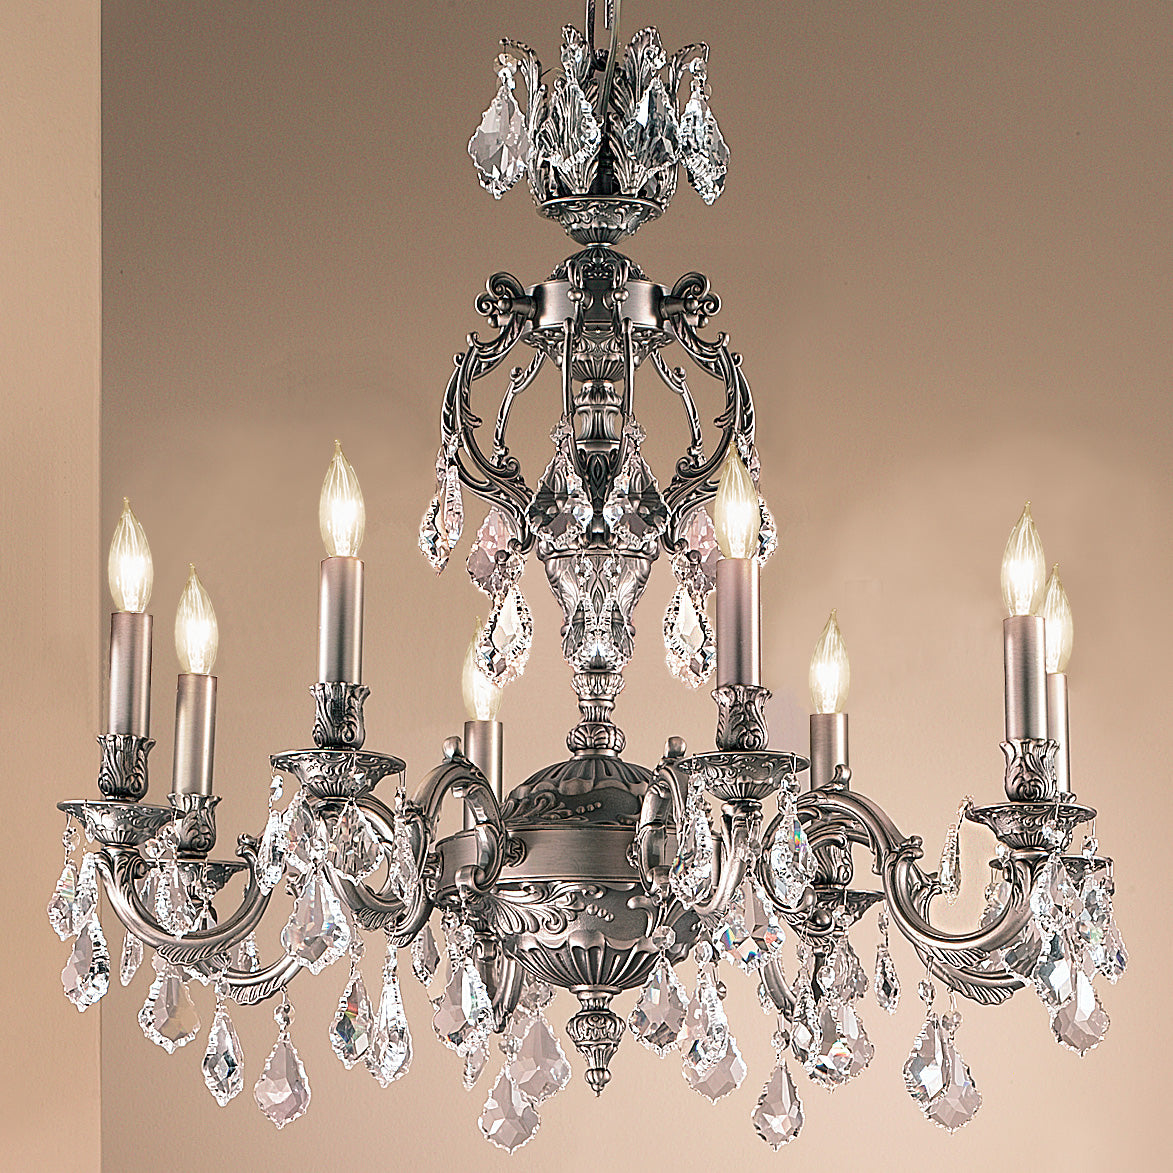 Classic Lighting 57378 AGB SC Chateau Crystal Chandelier in Aged Bronze (Imported from Spain)